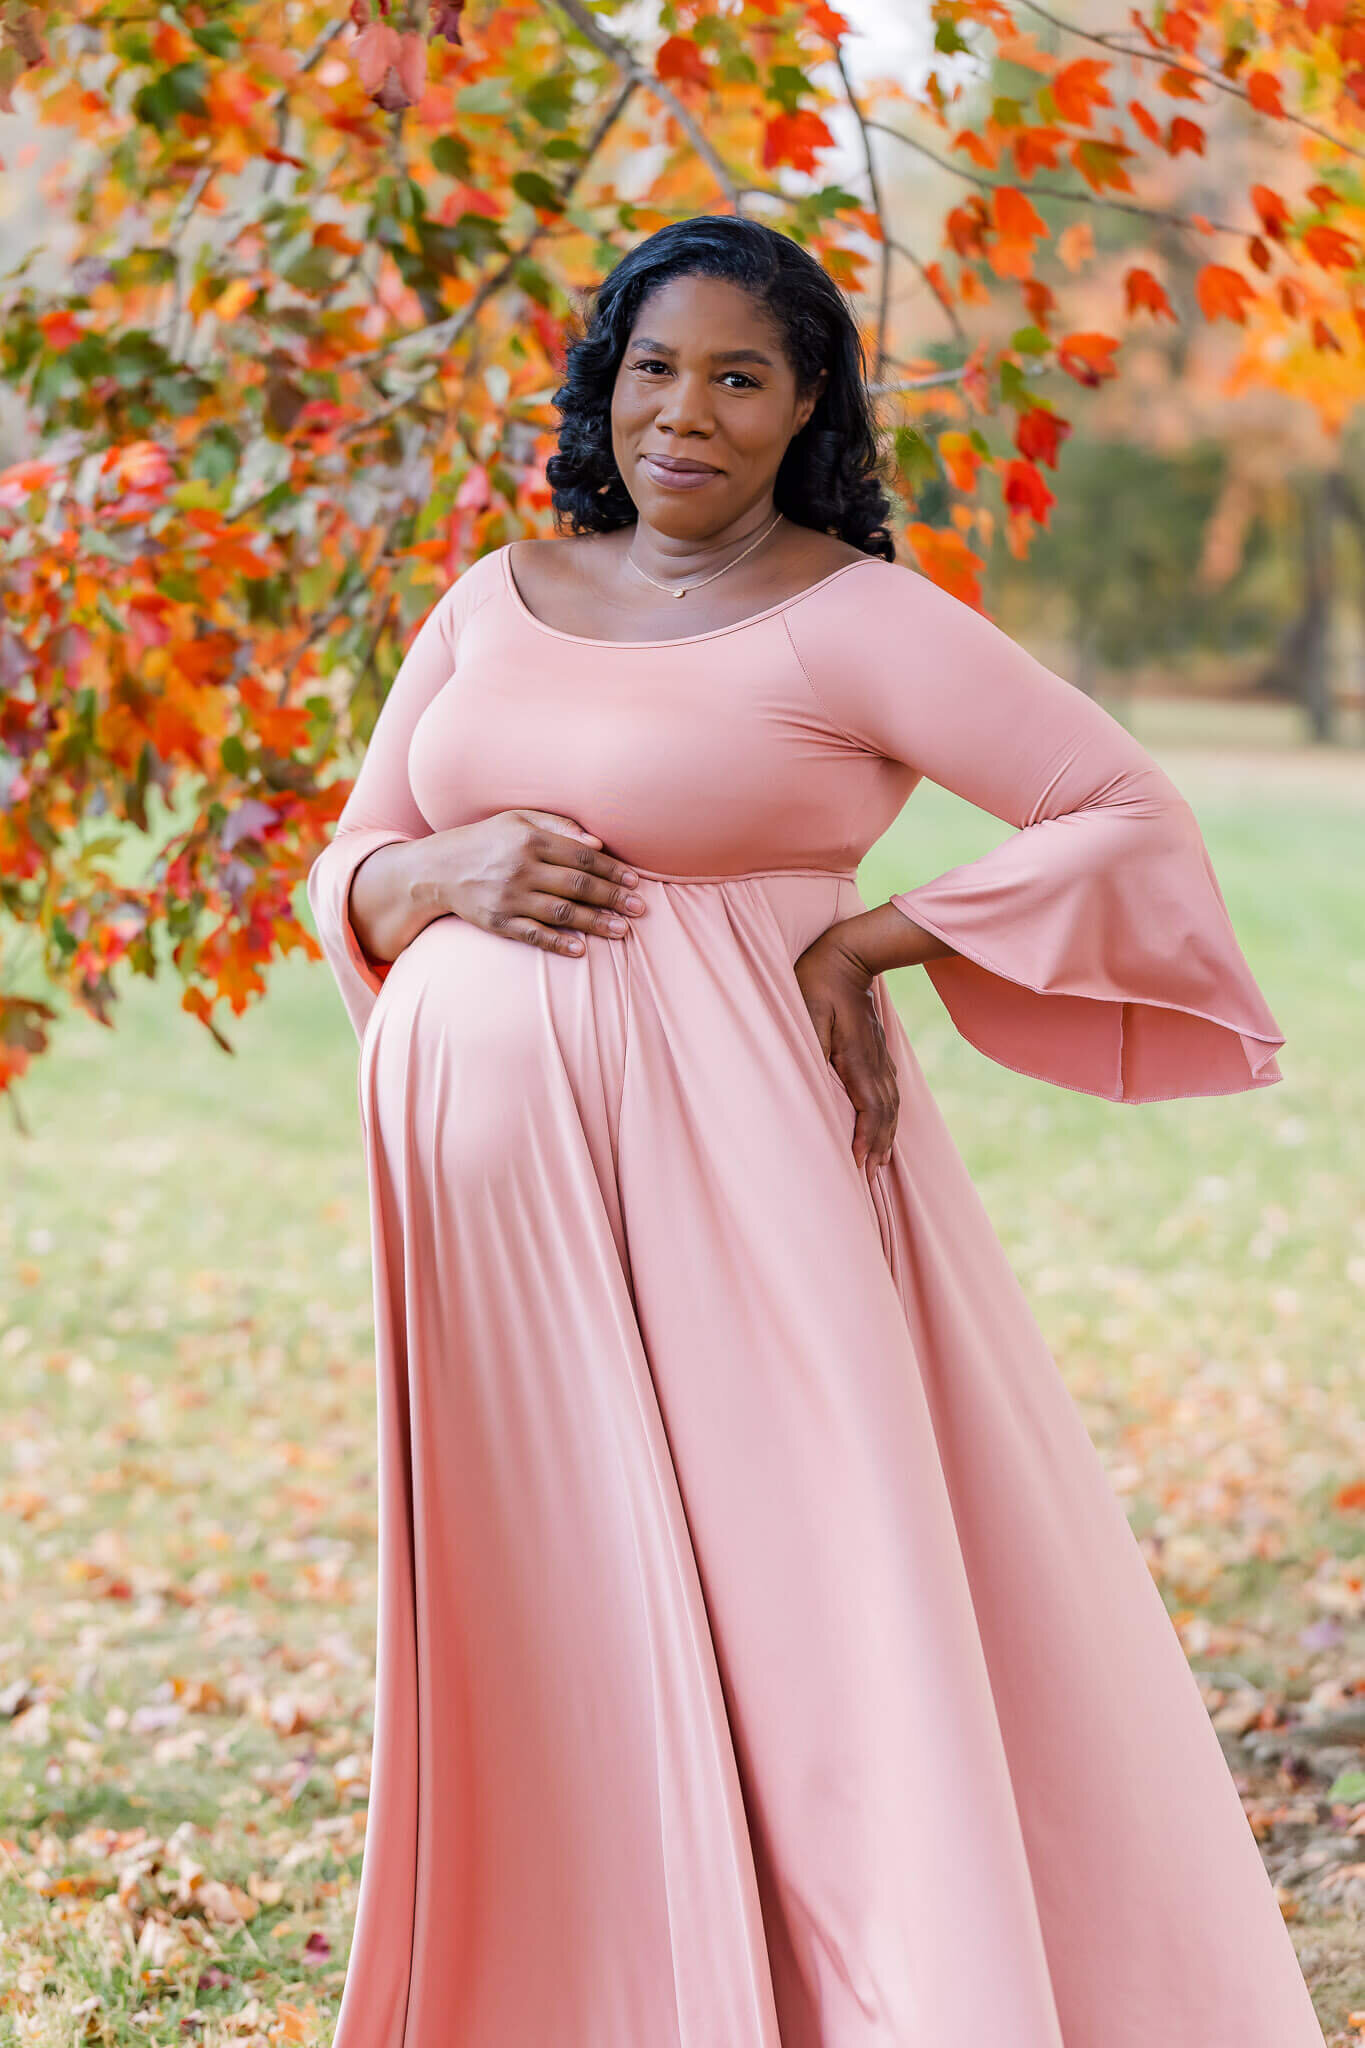 A mother-to-be embracing her pregnant belly during her maternity session in Alexandria, VA.